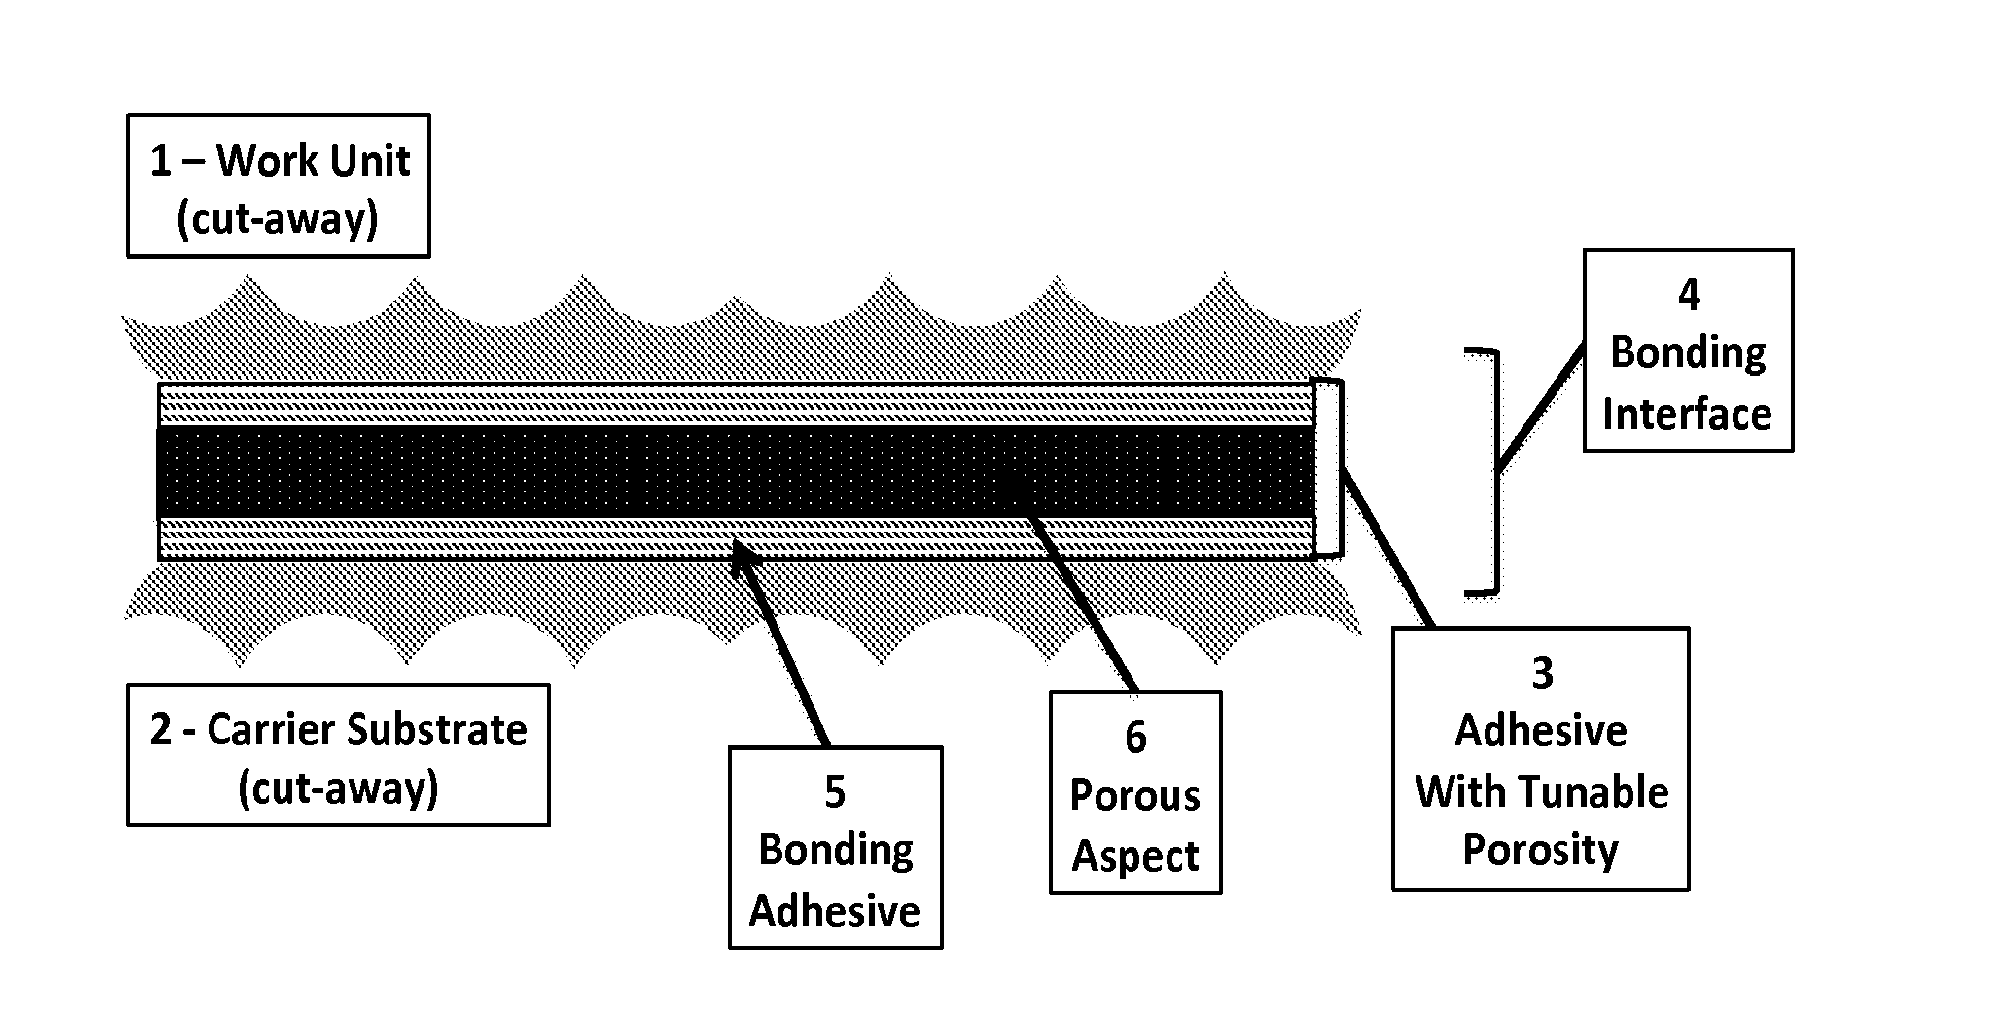 Adhesive with tunable porosity and methods to support temporary bonding applications